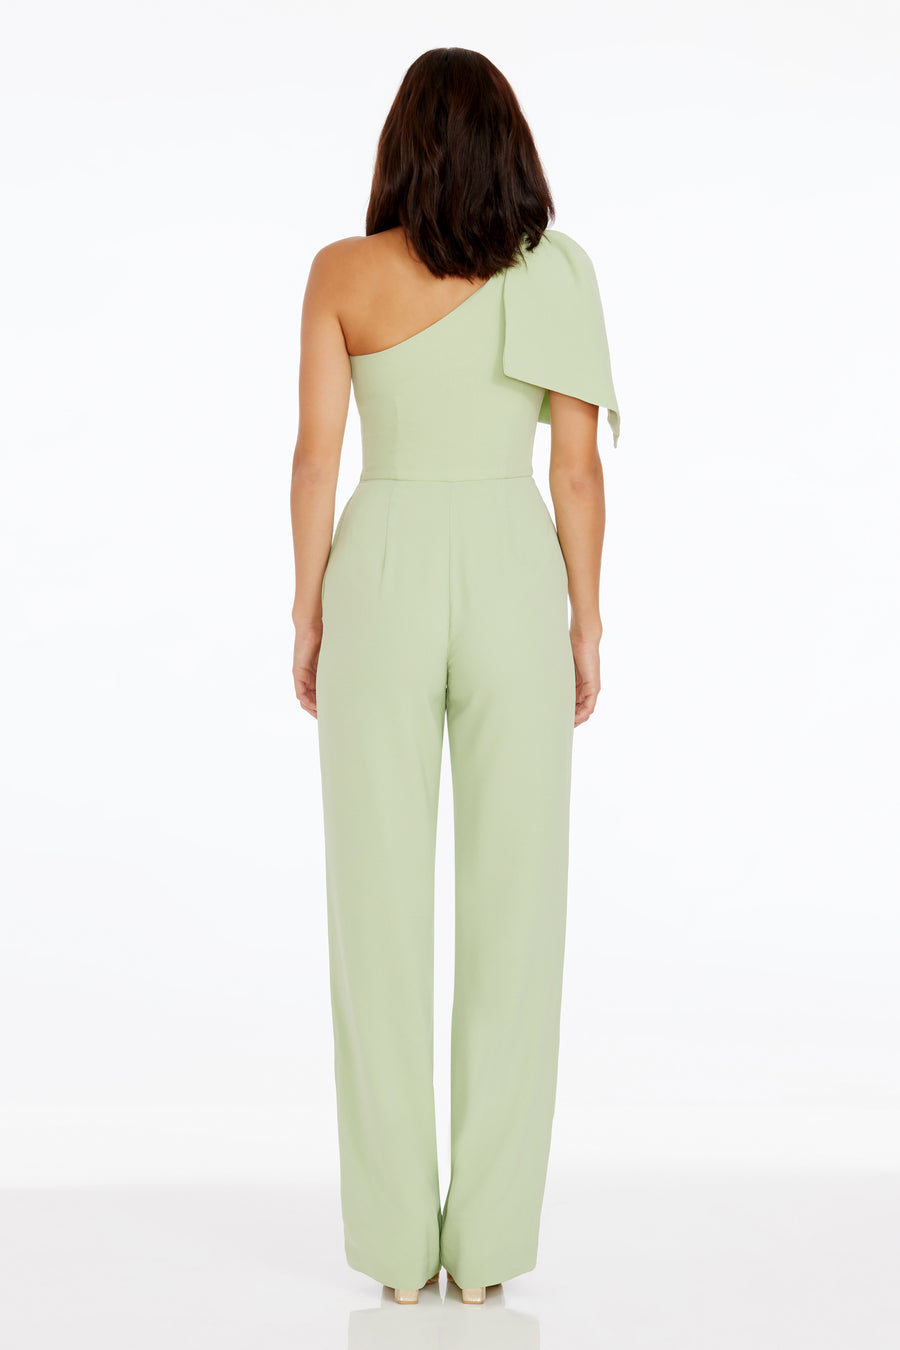 Lola May White Frilly Cold Shoulder Jumpsuit – Re-Fashion